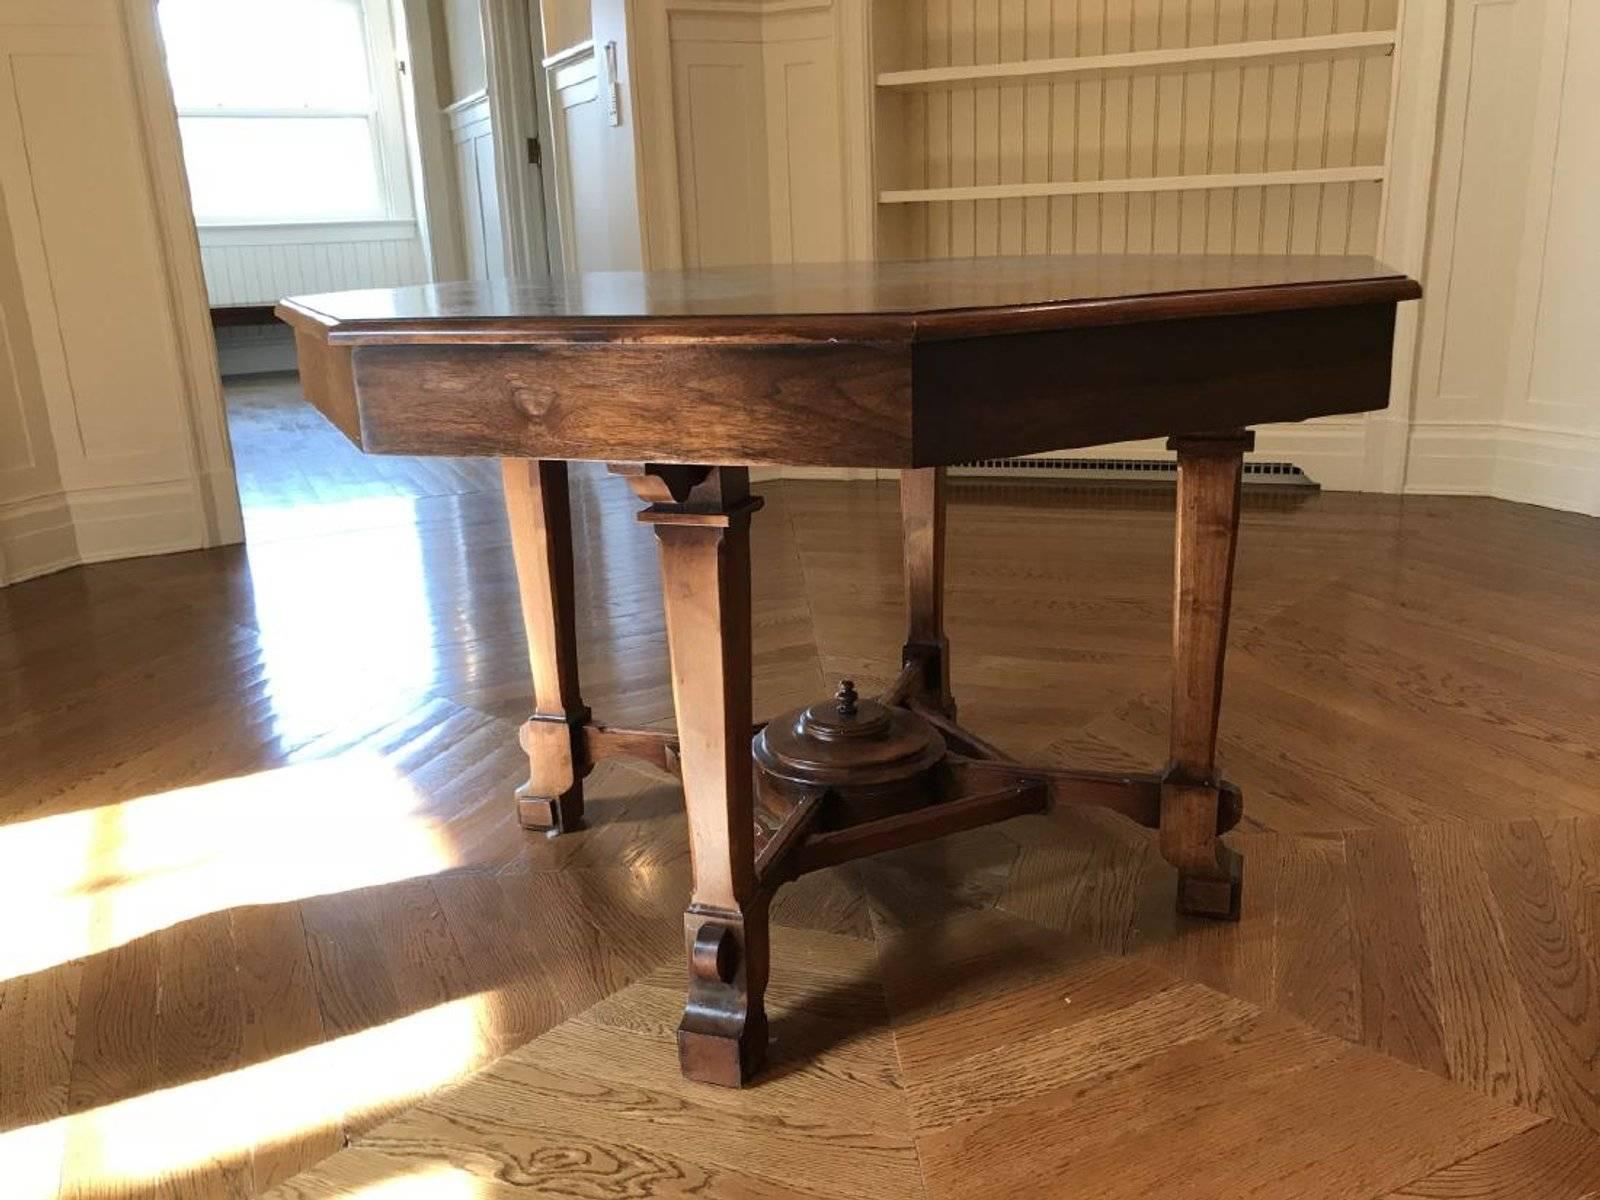 English Regency Revival antique circa 1900 octagonal mahogany center, parlor or library (for reading or displaying books and magazines) table refinished in a mahogany tone. The table features a six-sided top with an apron, supported by four legs and